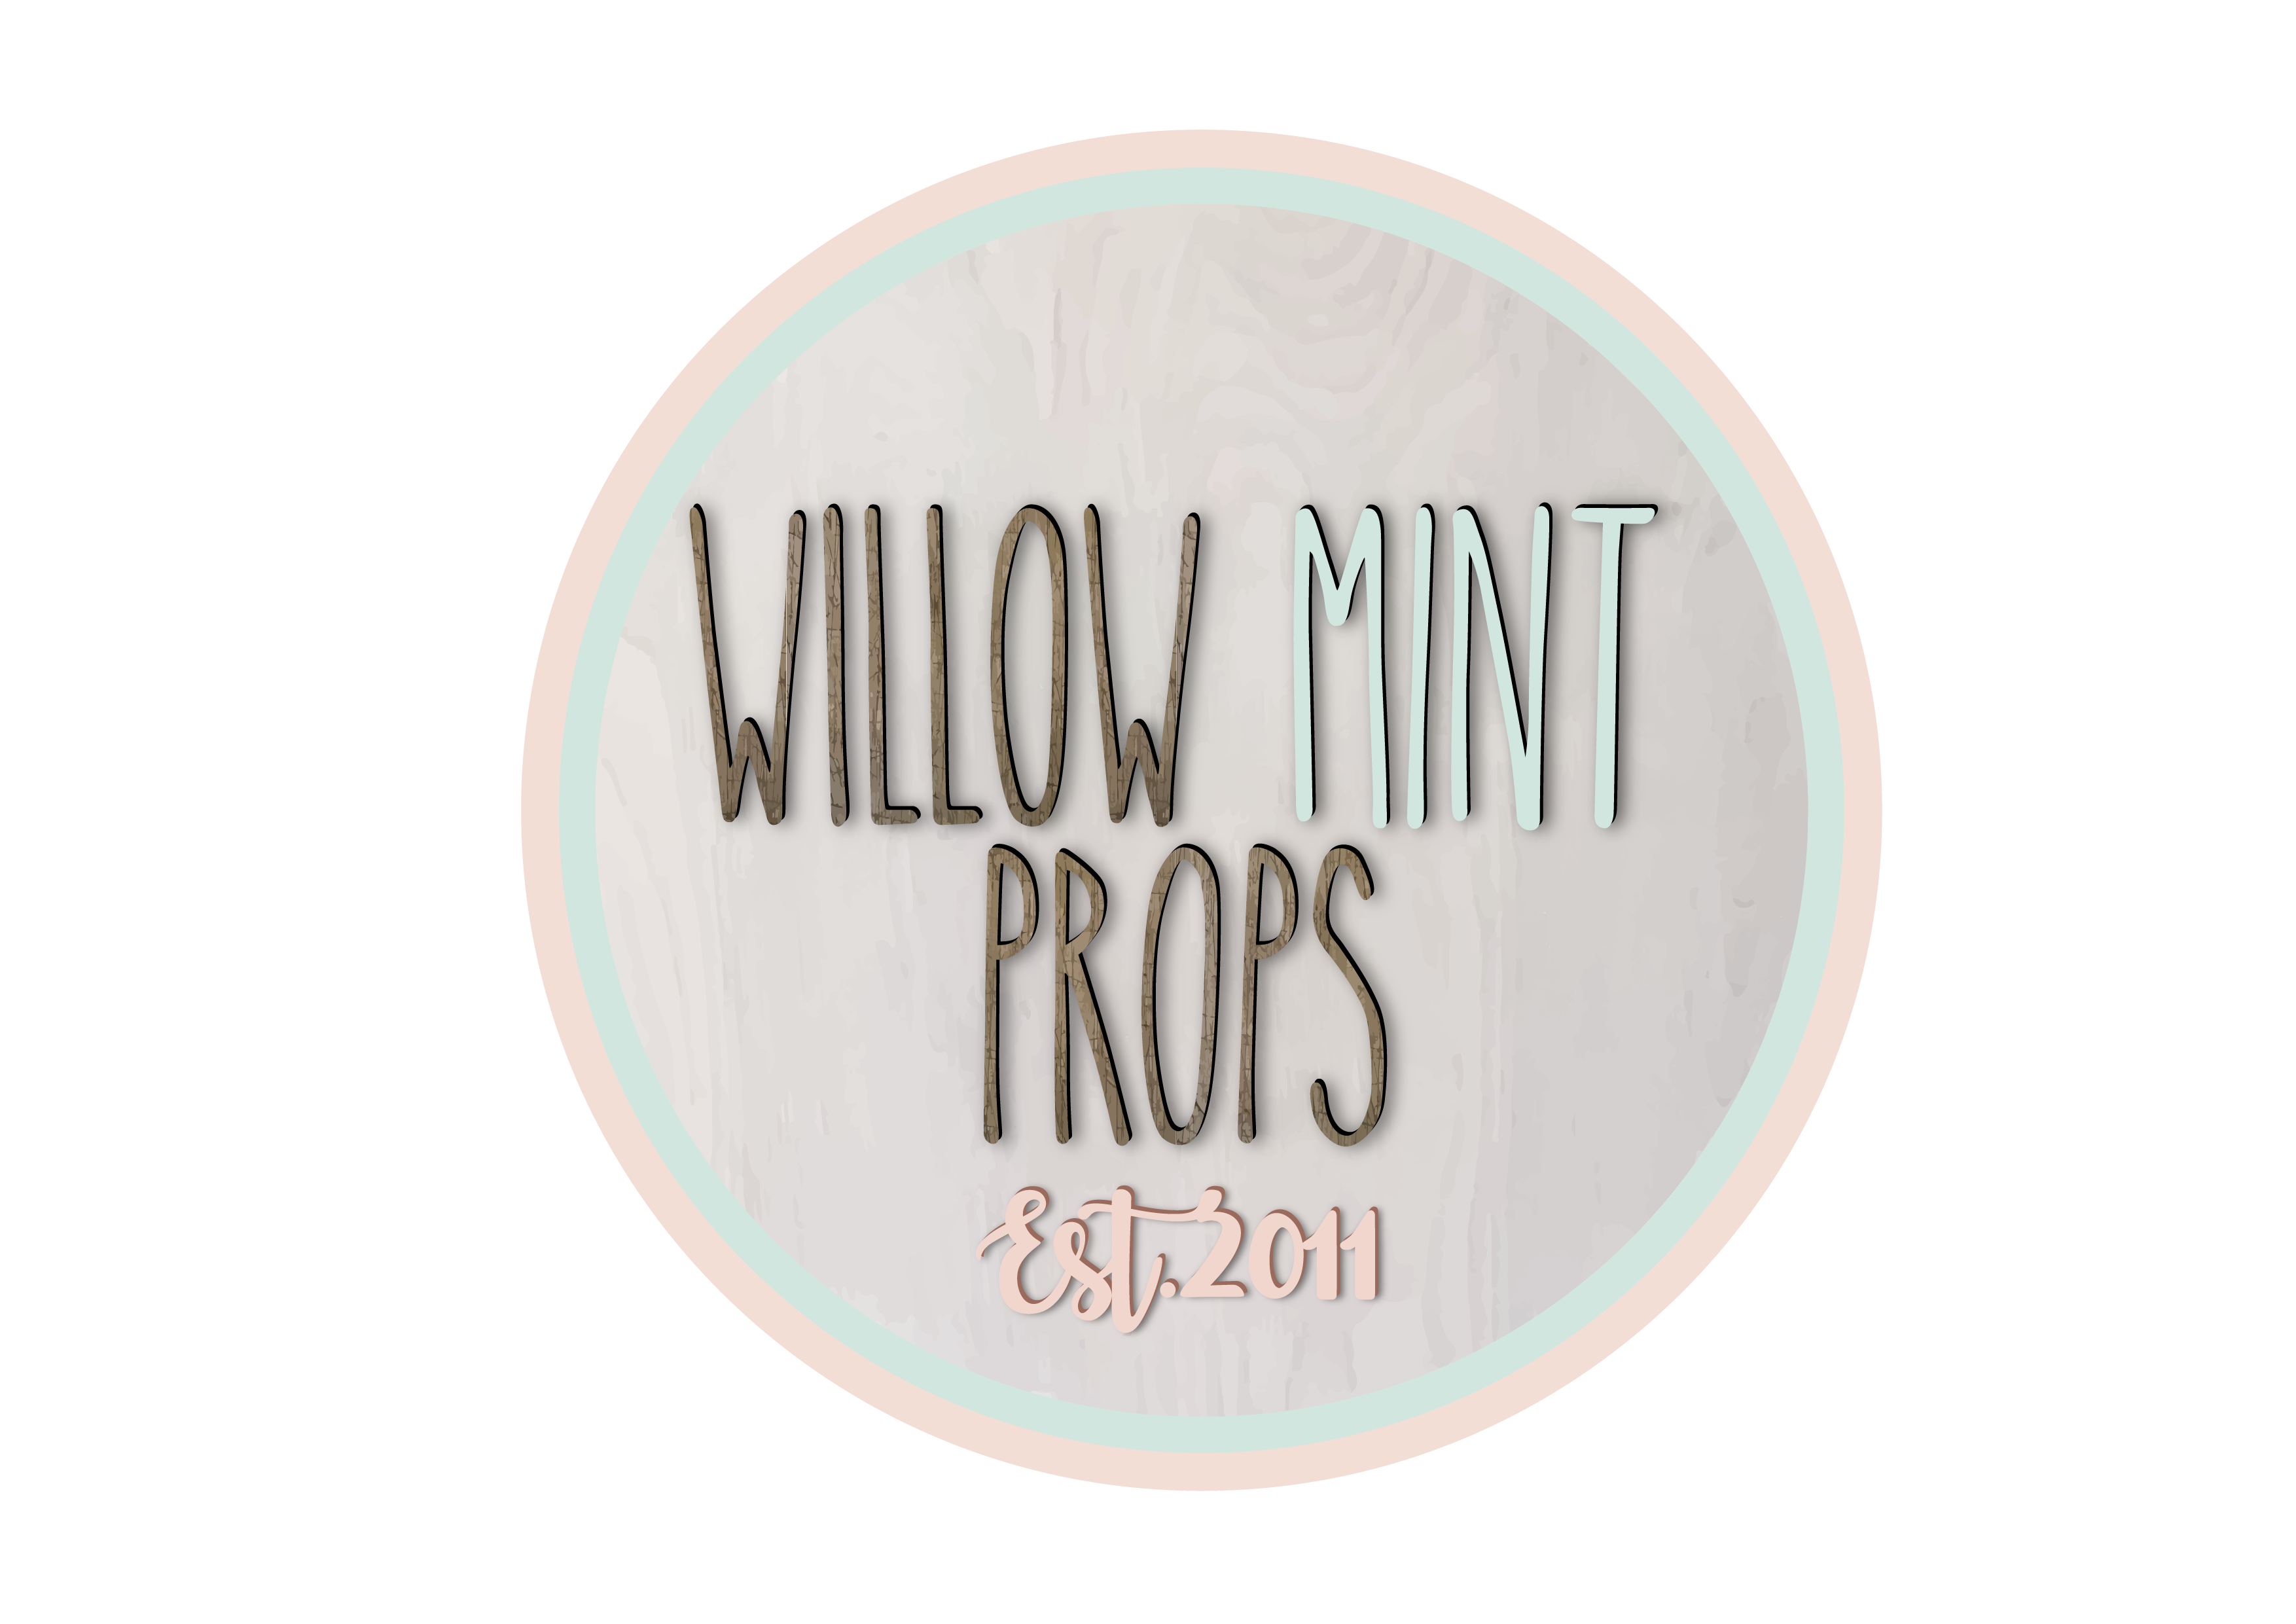 Willow Mint Props